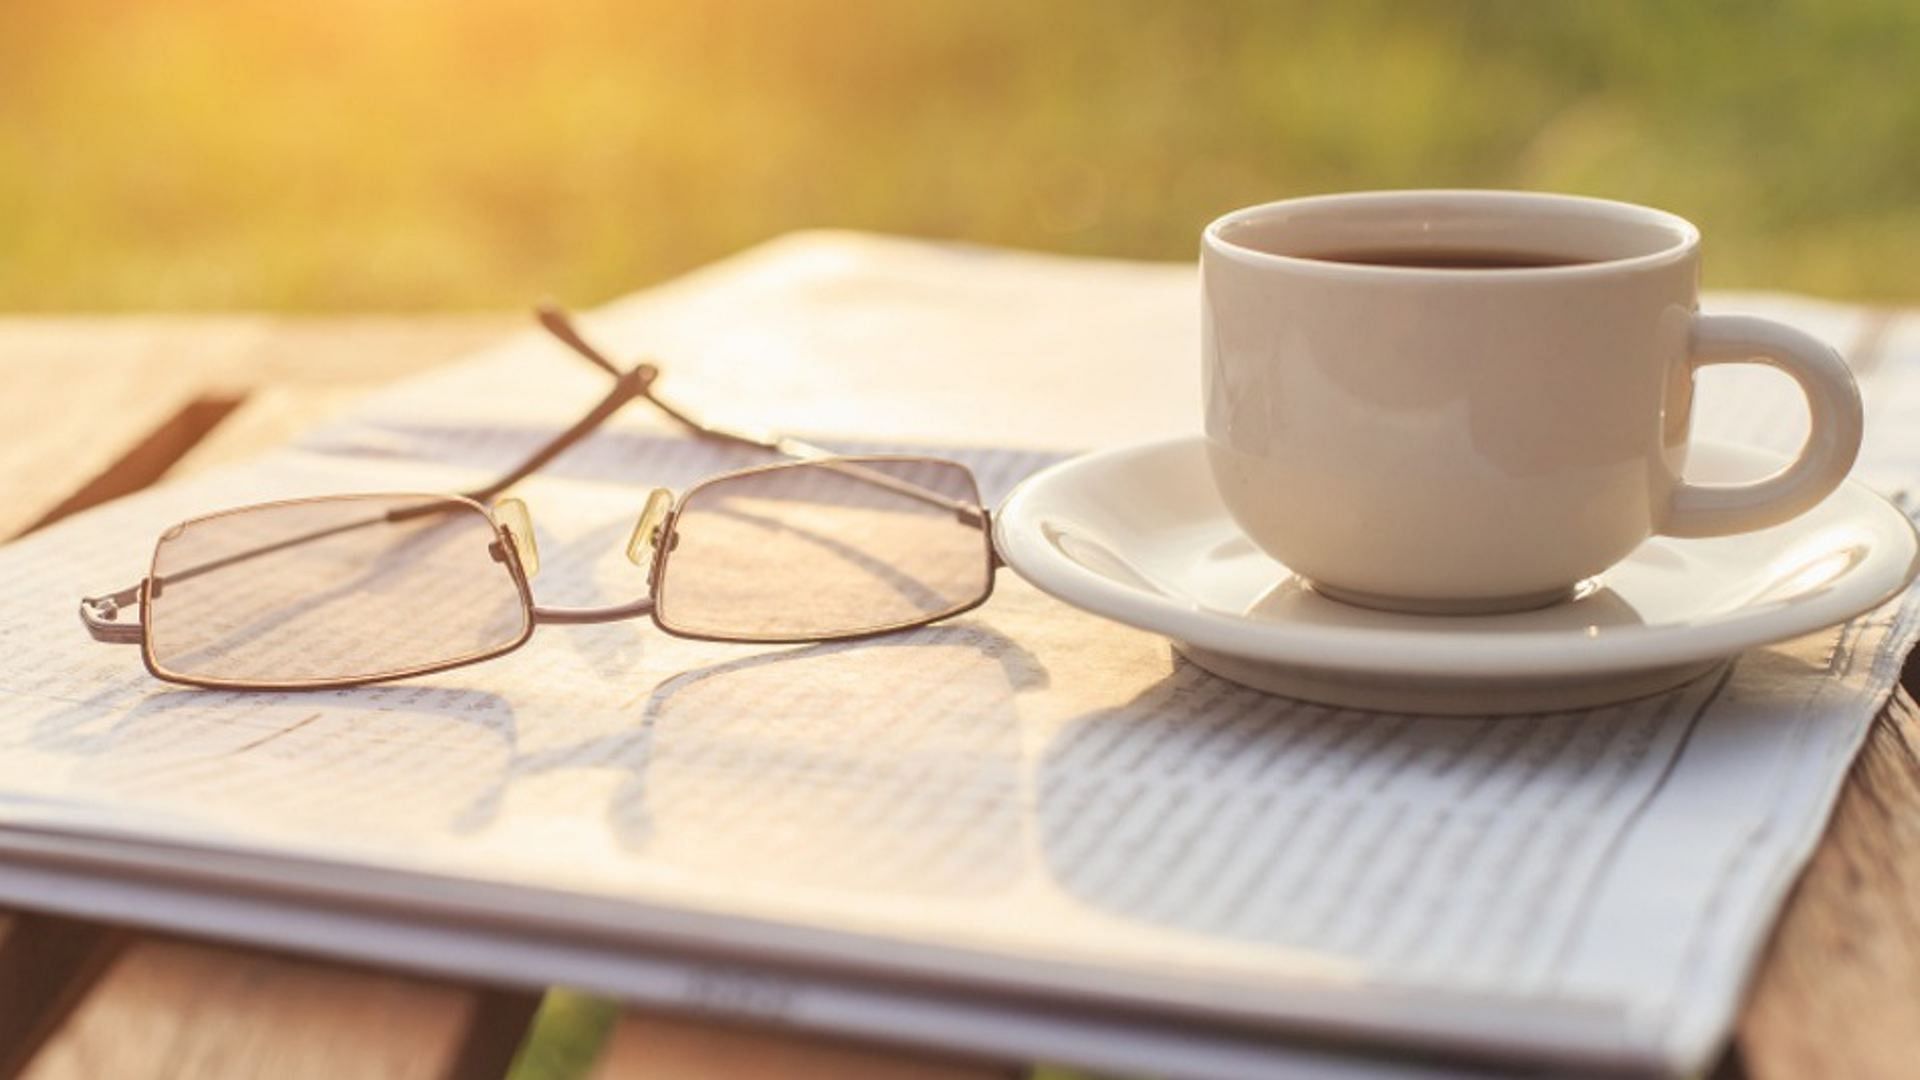 

Nothing like your morning cuppa and our round-up of the best op-eds on a Sunday. (Photo: iStockphoto)